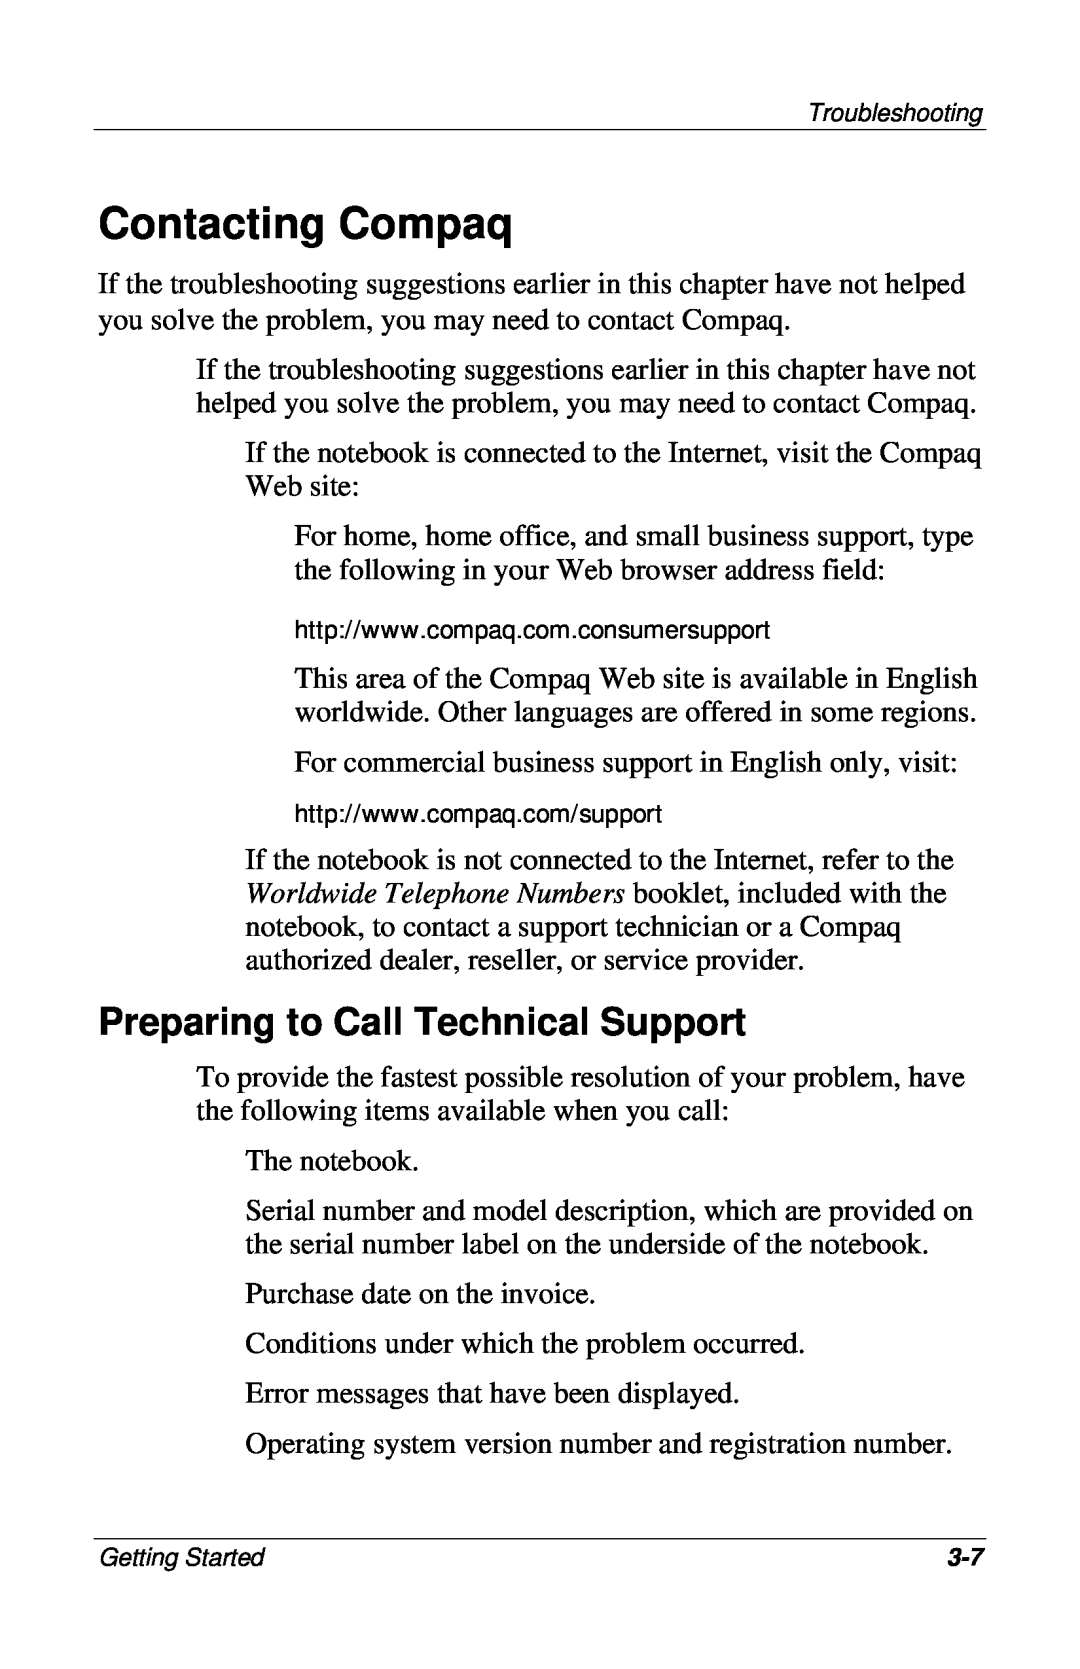 HP 909EA, 955AP, 950AP, 943AP, 945AP, 940AP, 935AP, 927AP, 930AP, 925EA Contacting Compaq, Preparing to Call Technical Support 